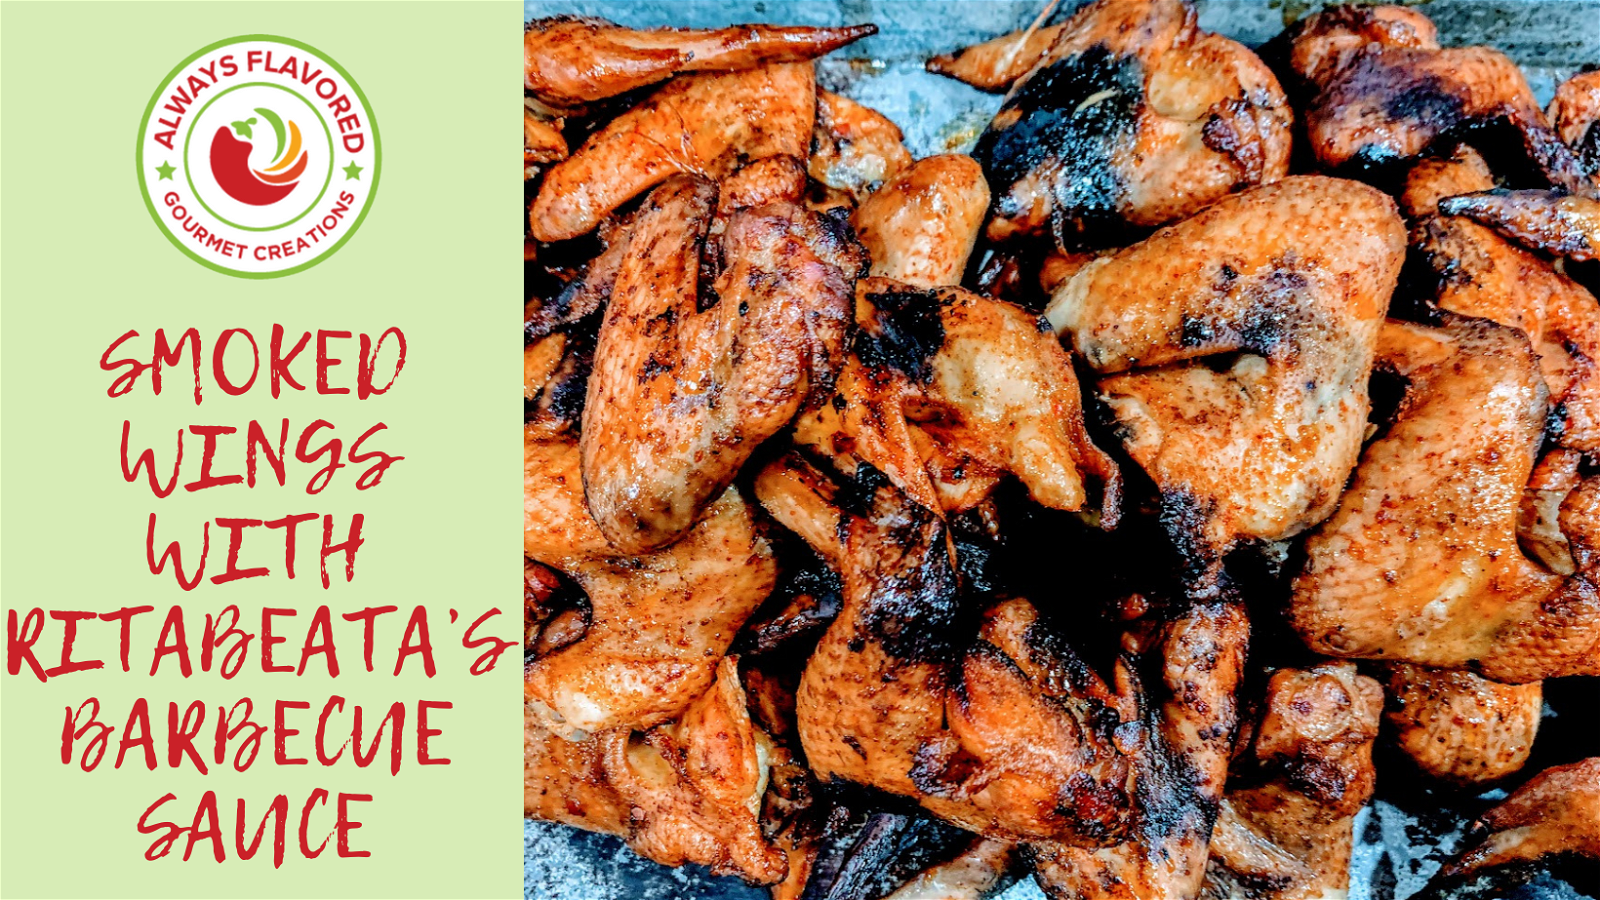 Image of Smoked Wings With Ritabeata’s Barbecue Sauce